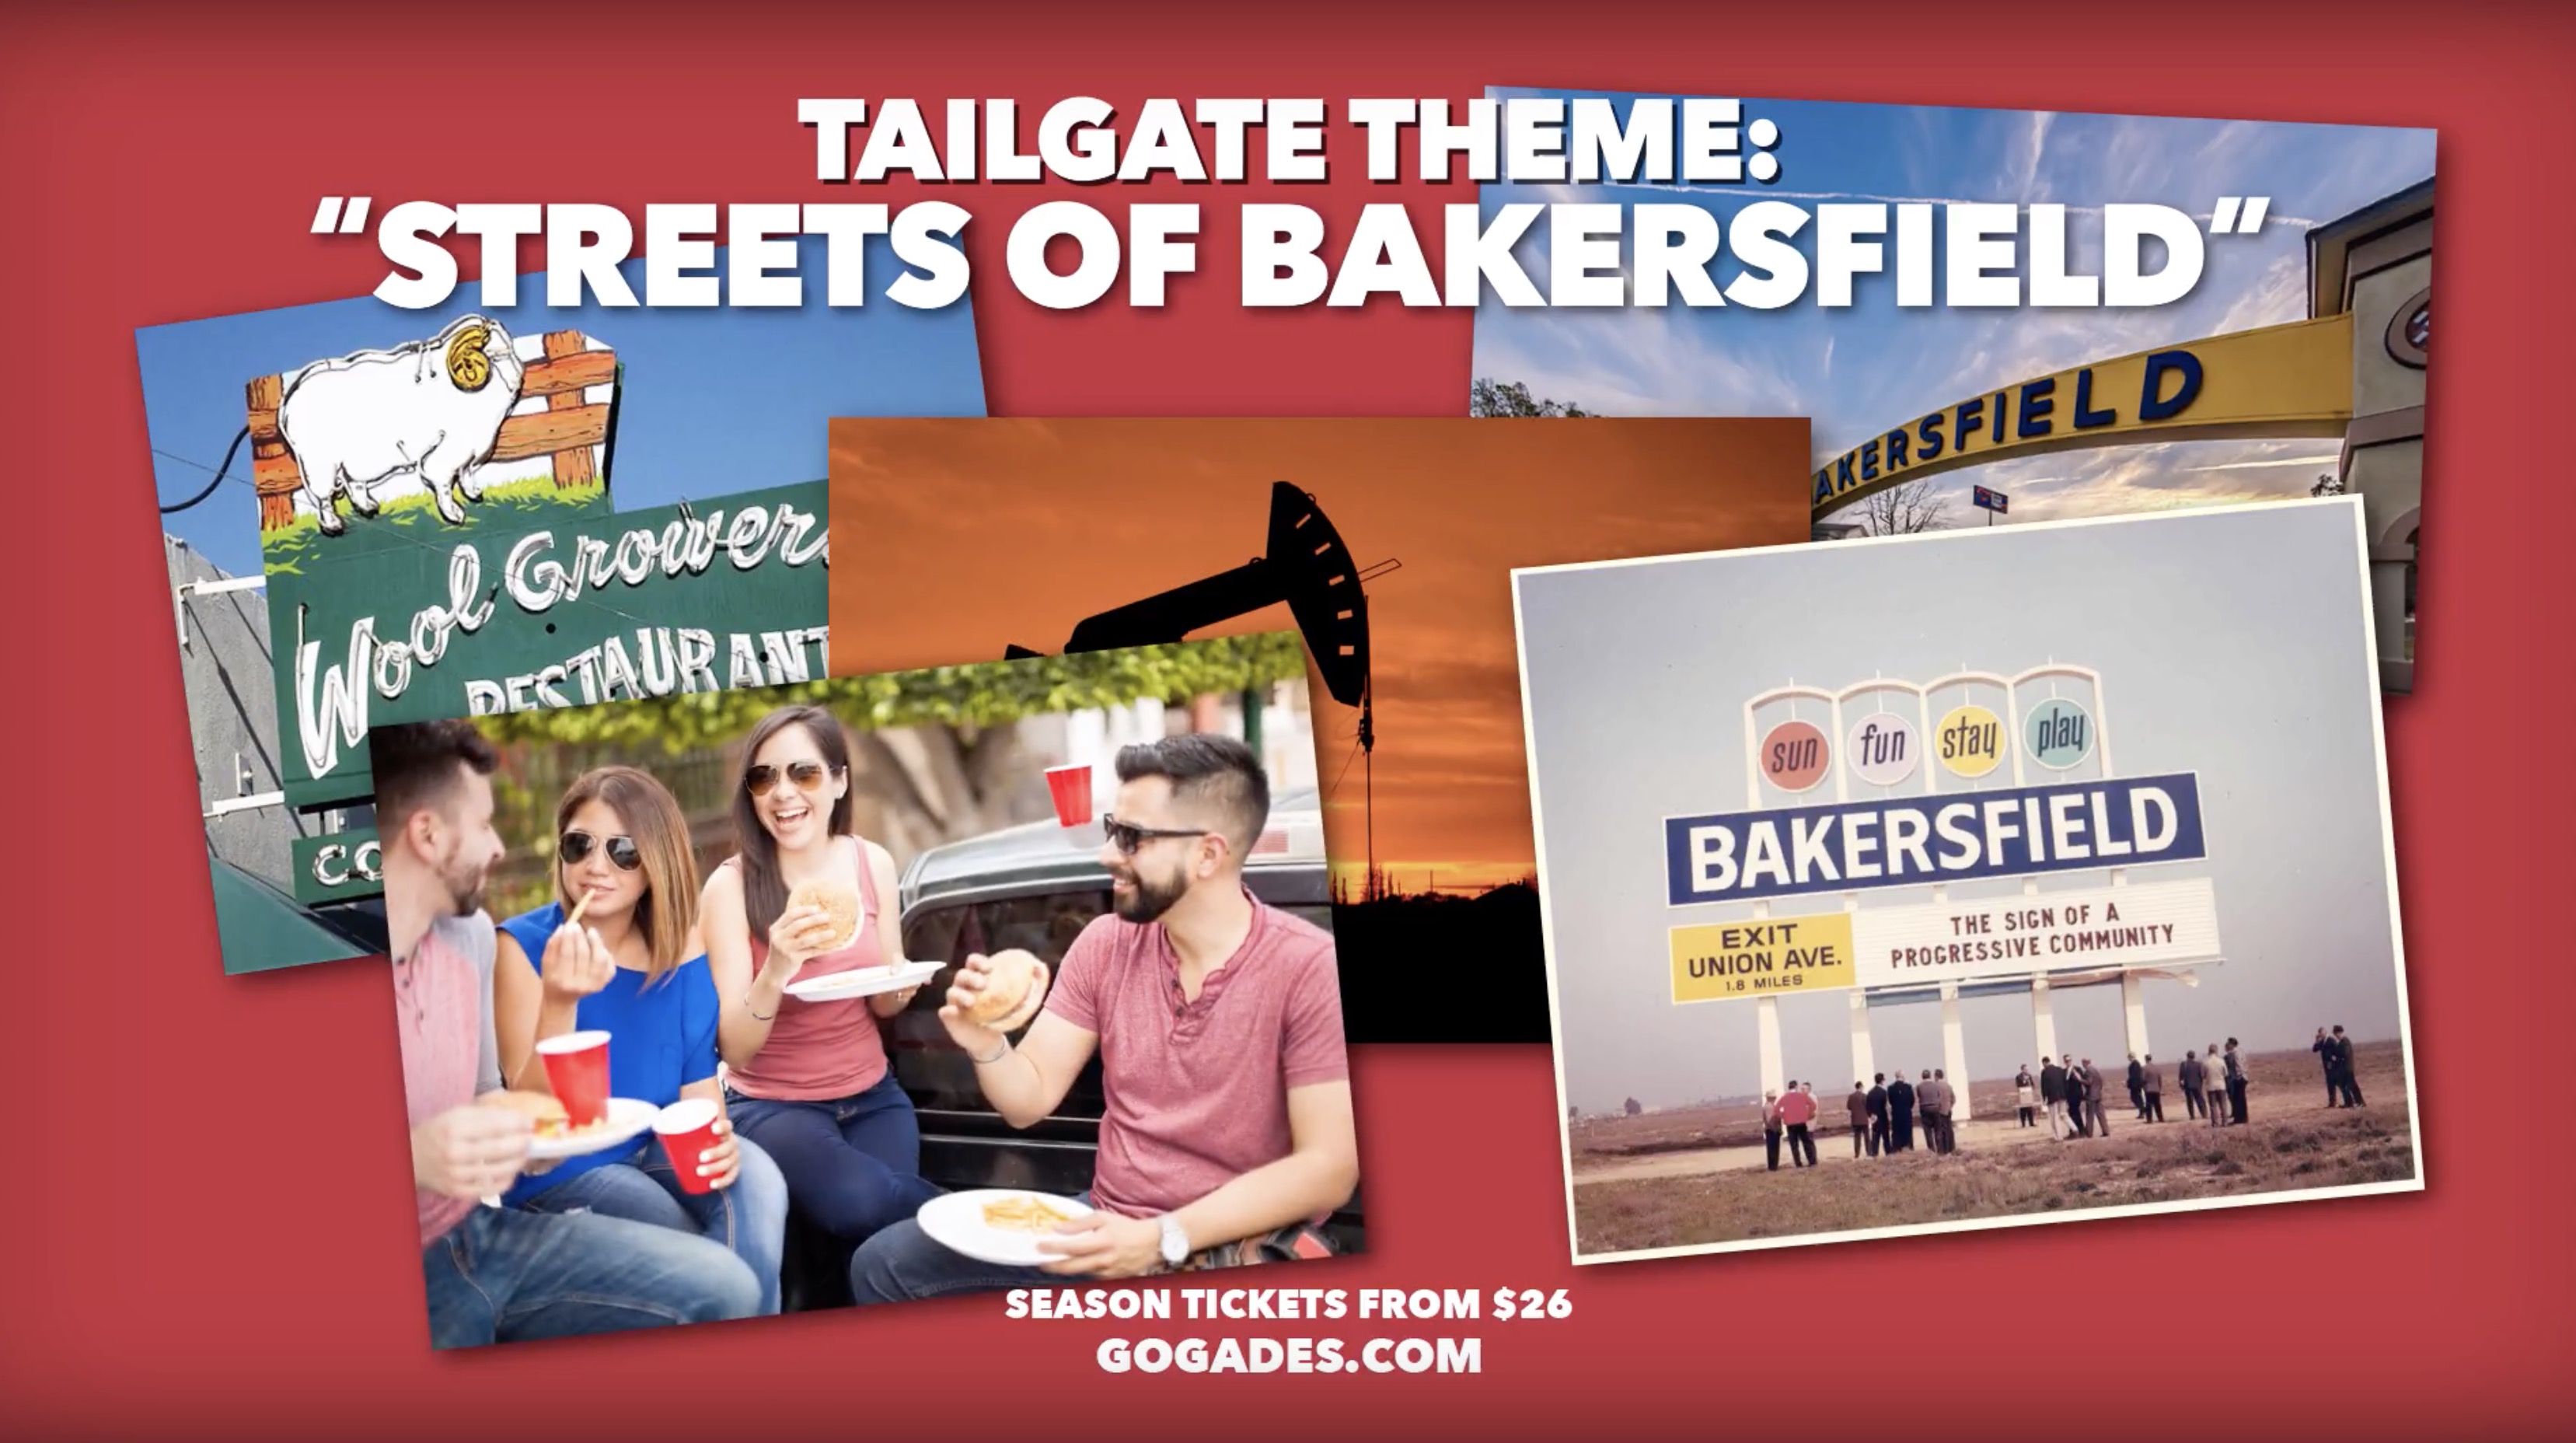 Commercial: Tailgating Theme Night